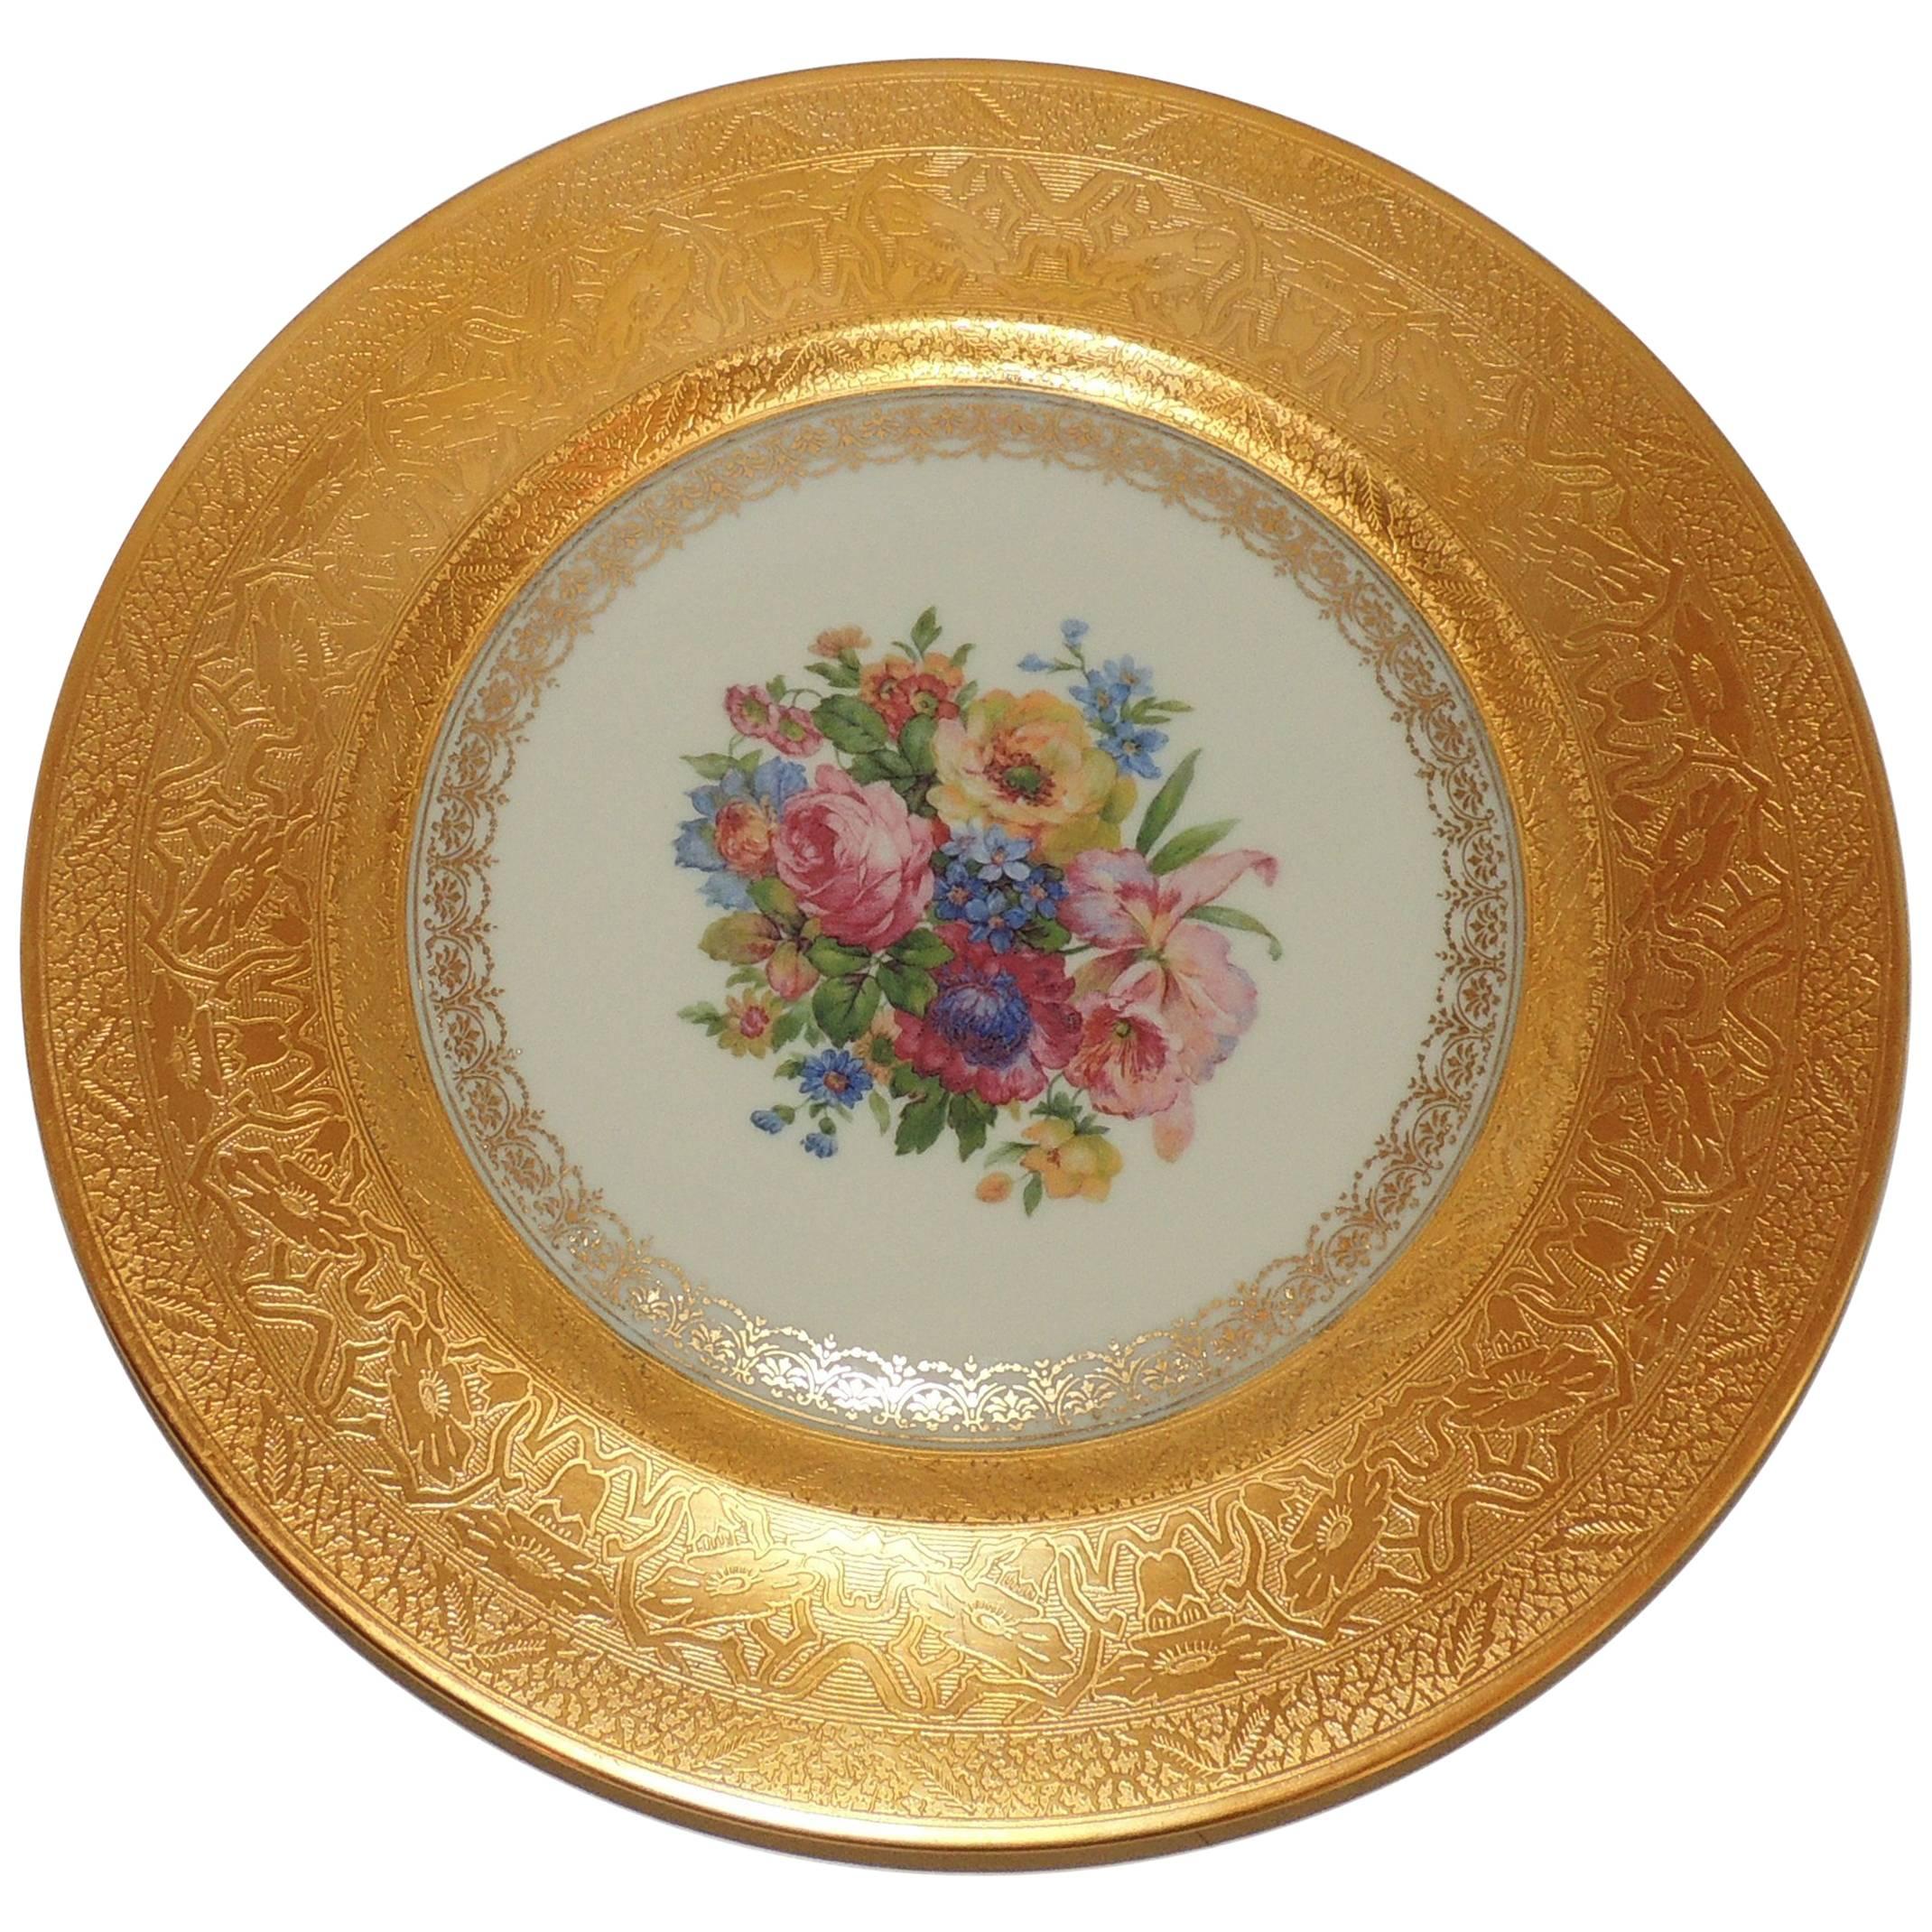 Heinrich & Co Selb Bavaria Wide Gold Encrusted Band Dinner Plate 